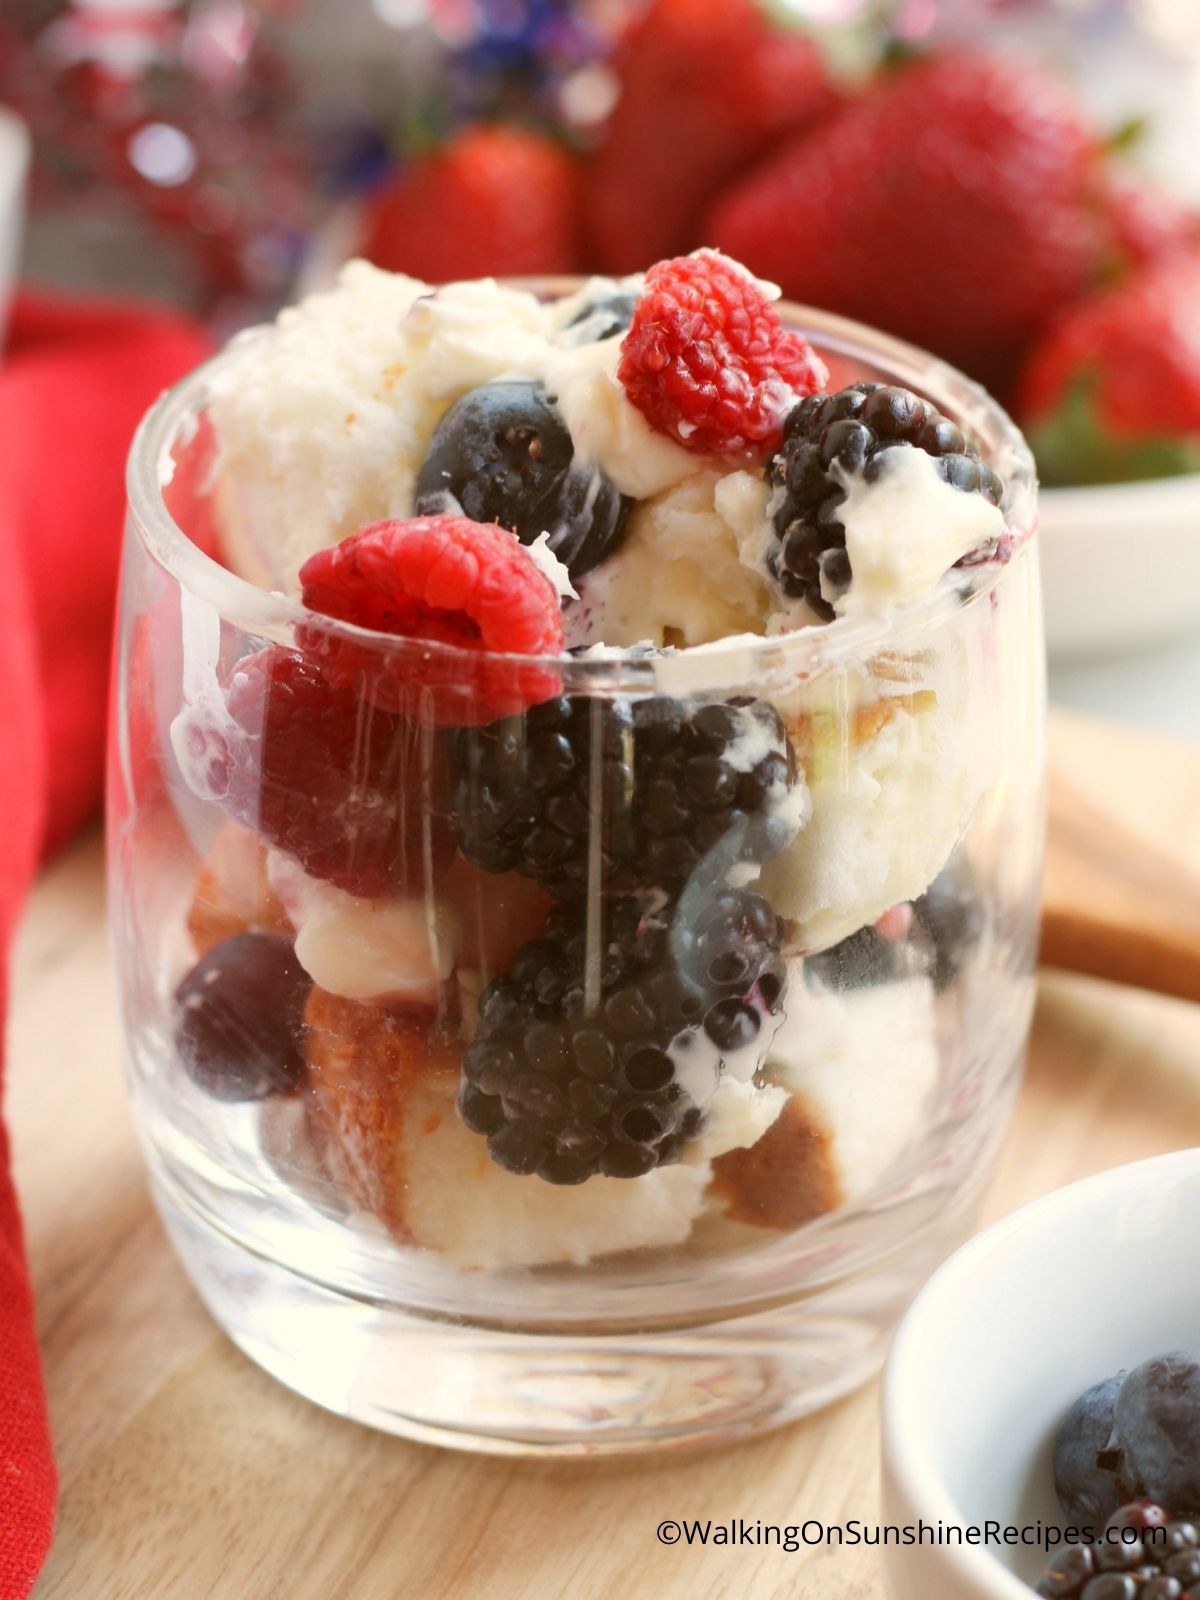 angel food cake trifle with strawberries and blueberries.